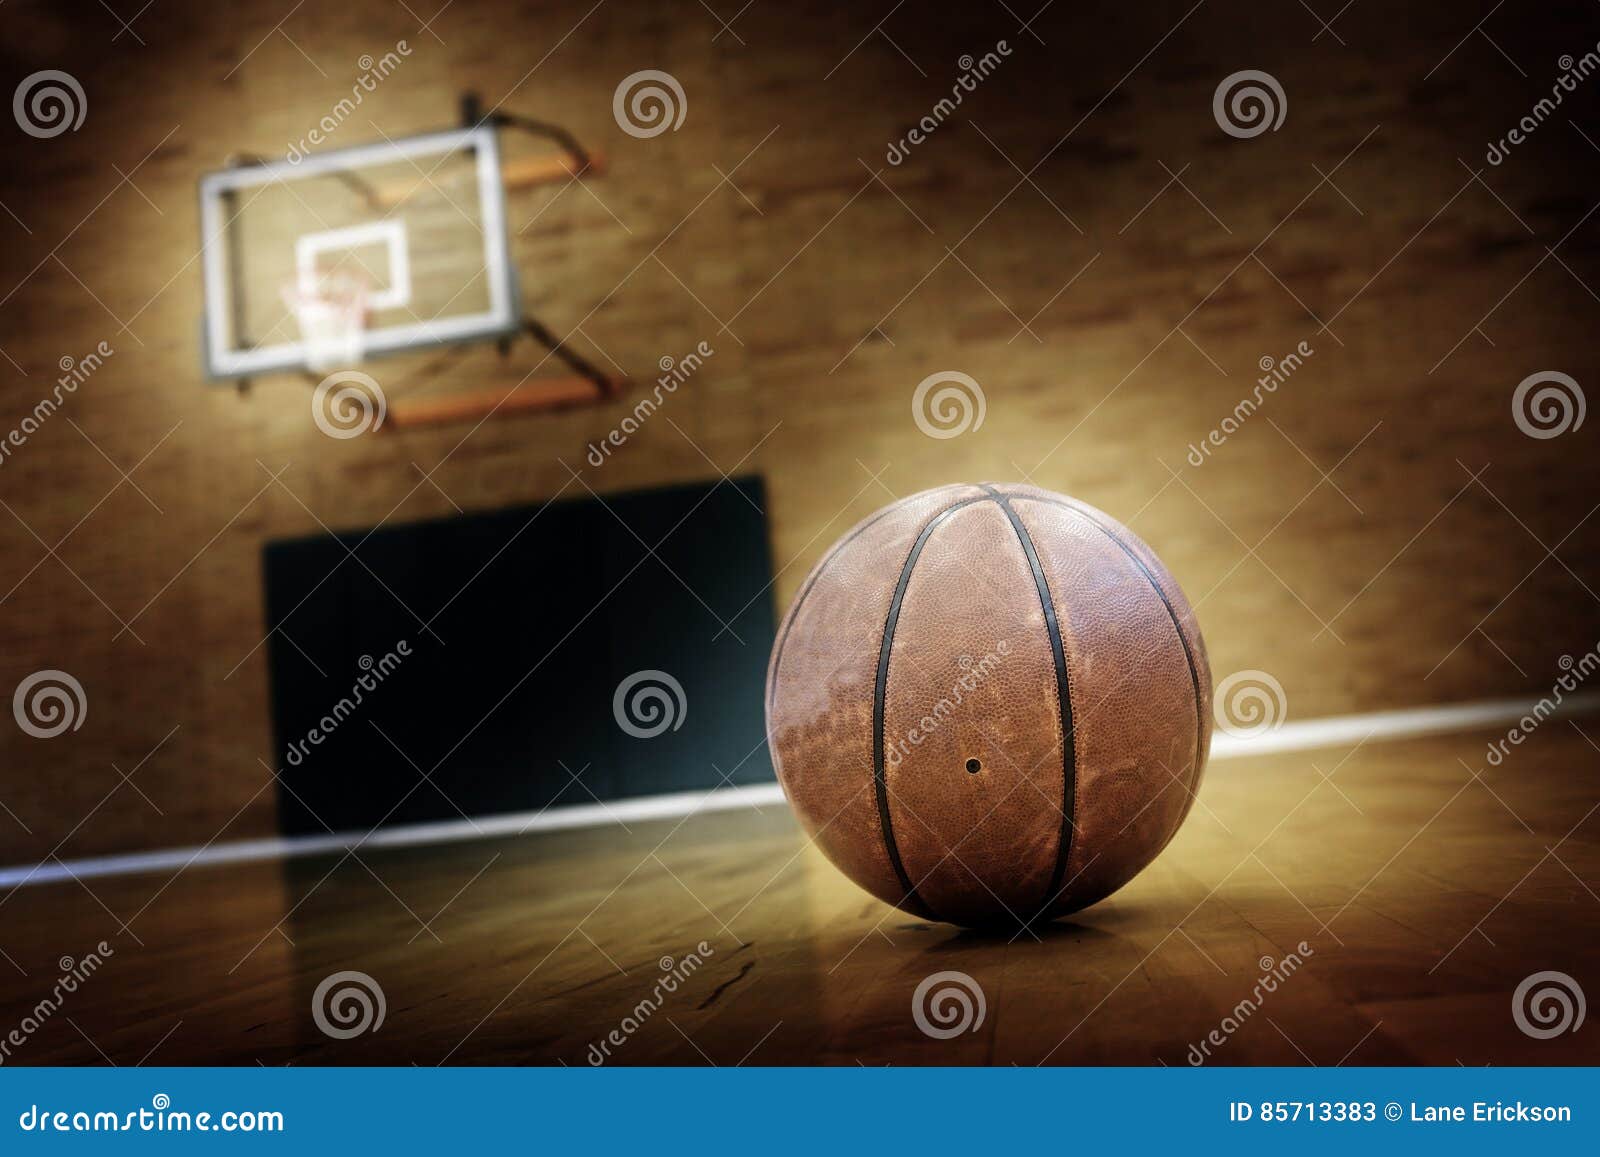 Man Playing a Ball on the Basketball Court · Free Stock Photo